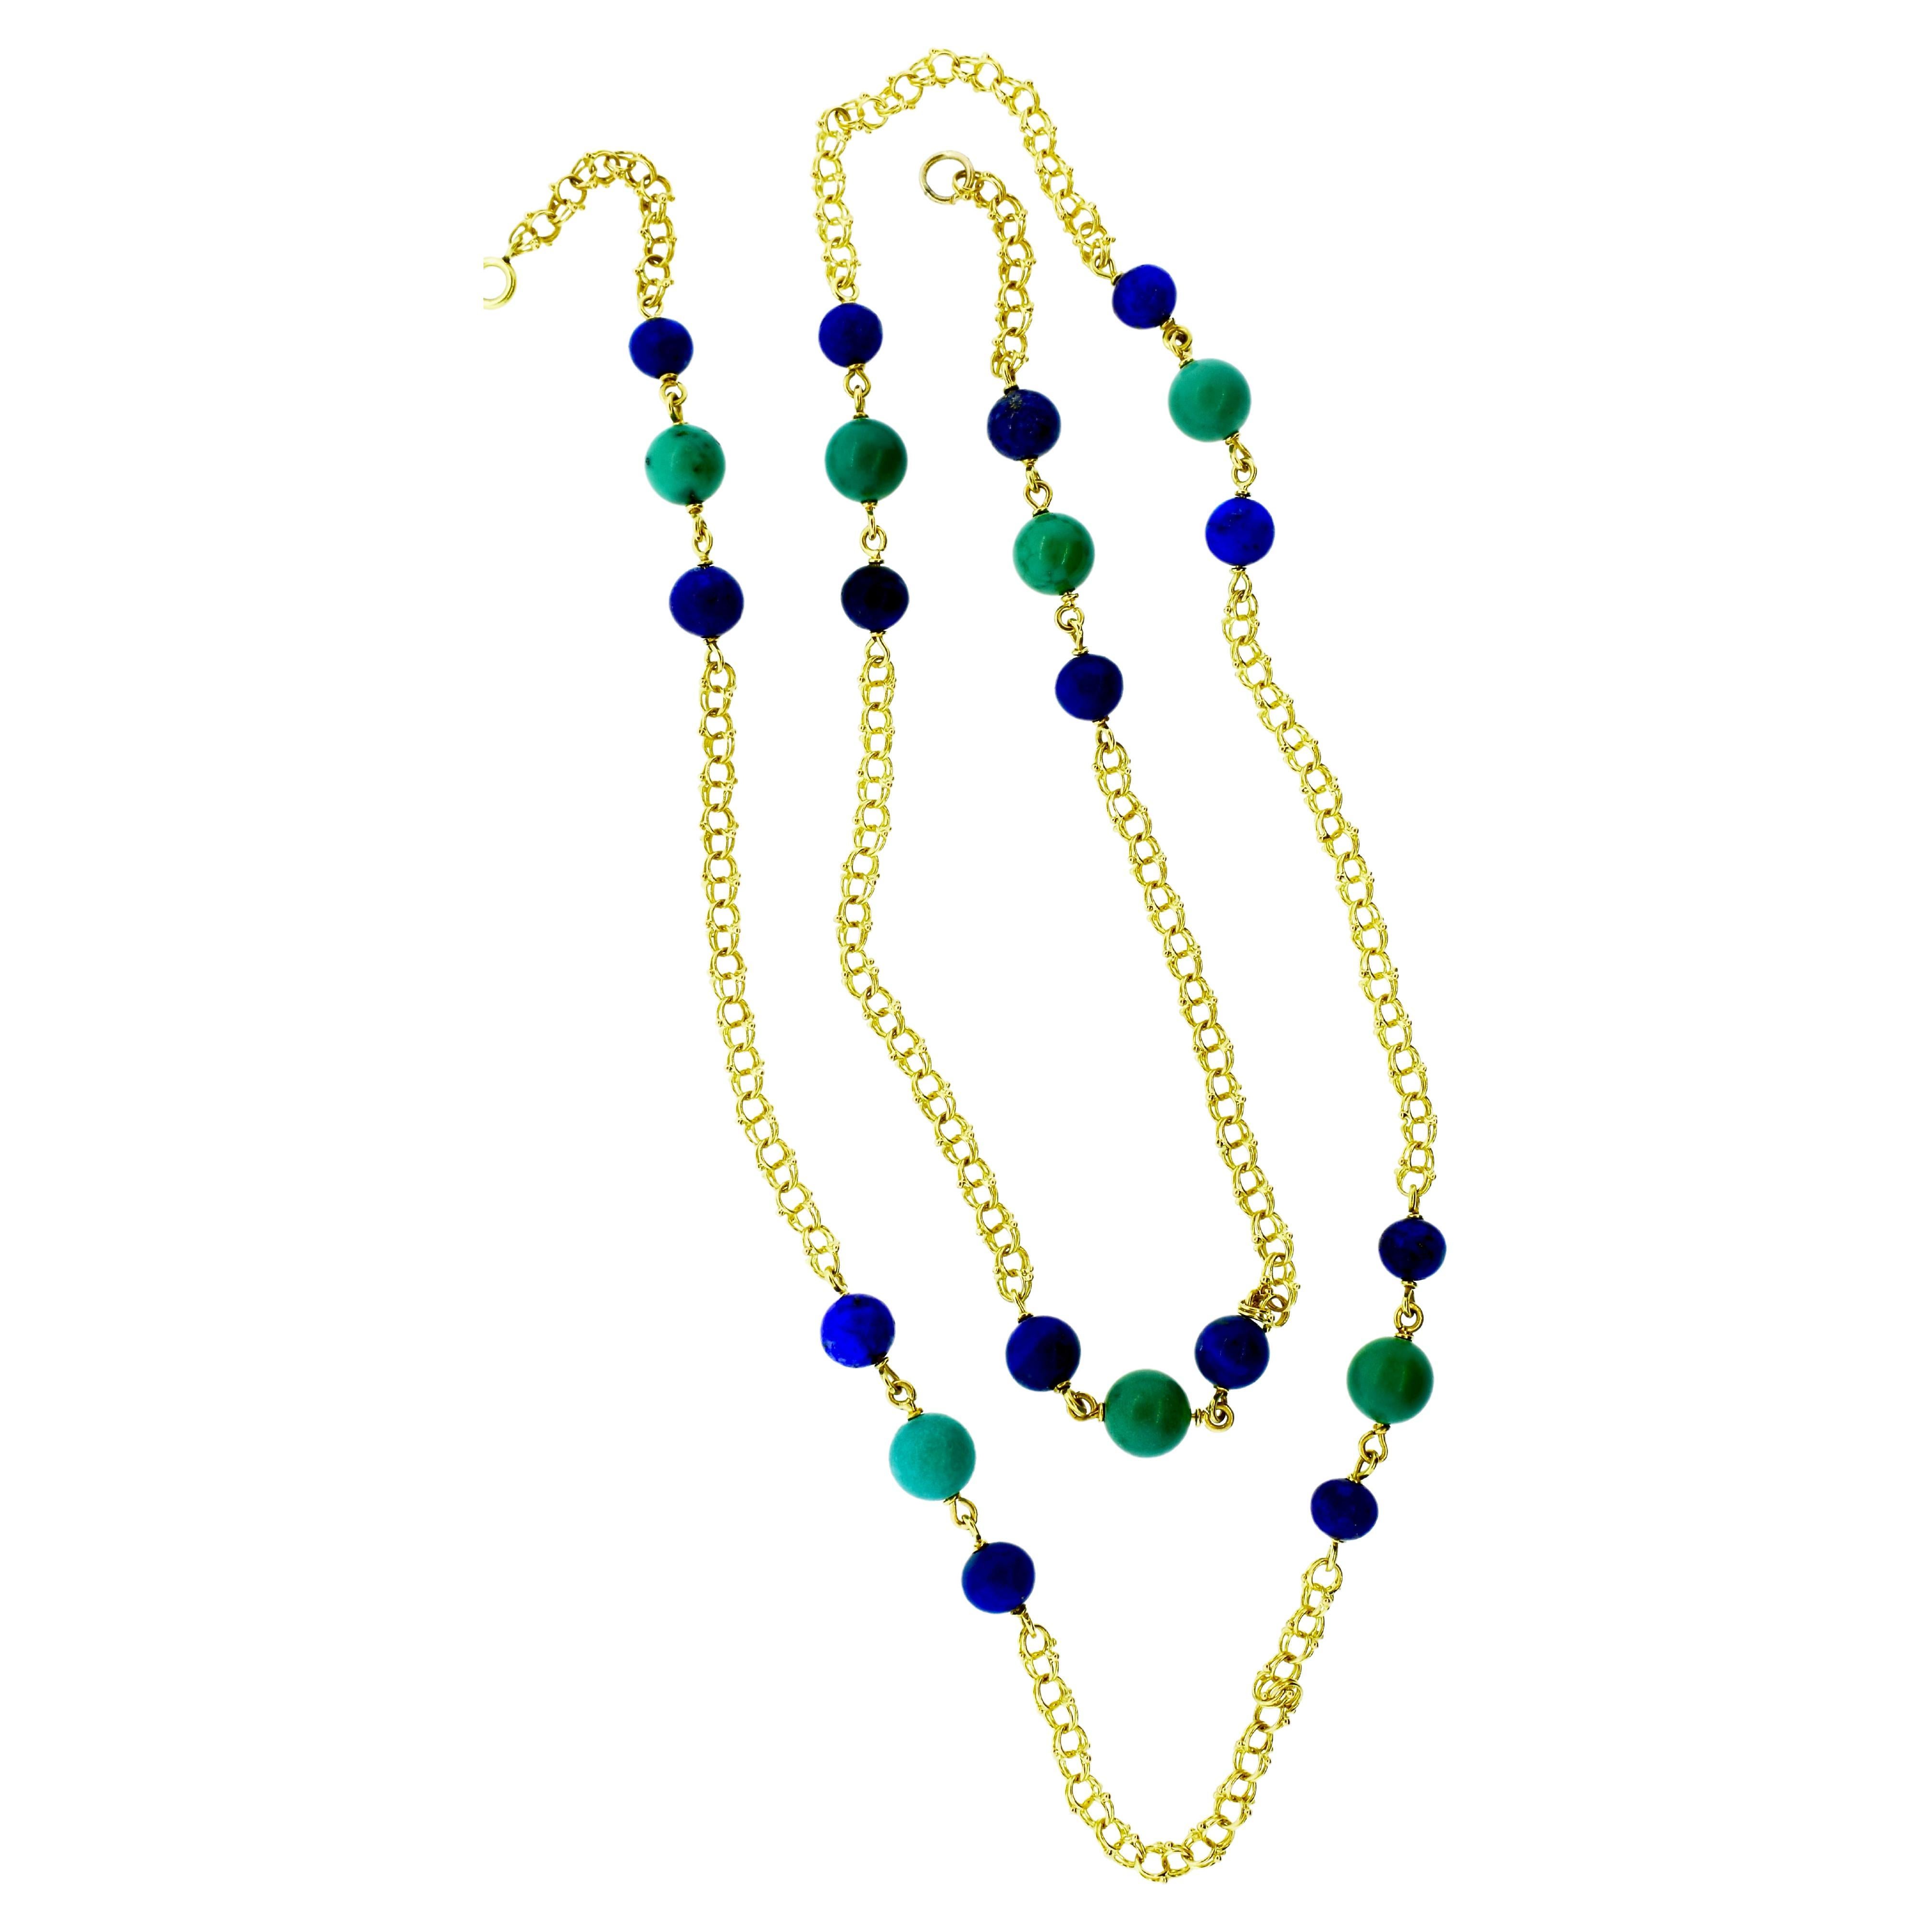 Long gold chain circa 1950 accented with bright blue lapis lazuli spheres and  green-blue turquoise.  The lapis beads range in size from 7.3 to 8.3.  The turquoise beads range in size from 9.3 to 9.5.  The intricate gold chain is 4.5 mm wide.  The